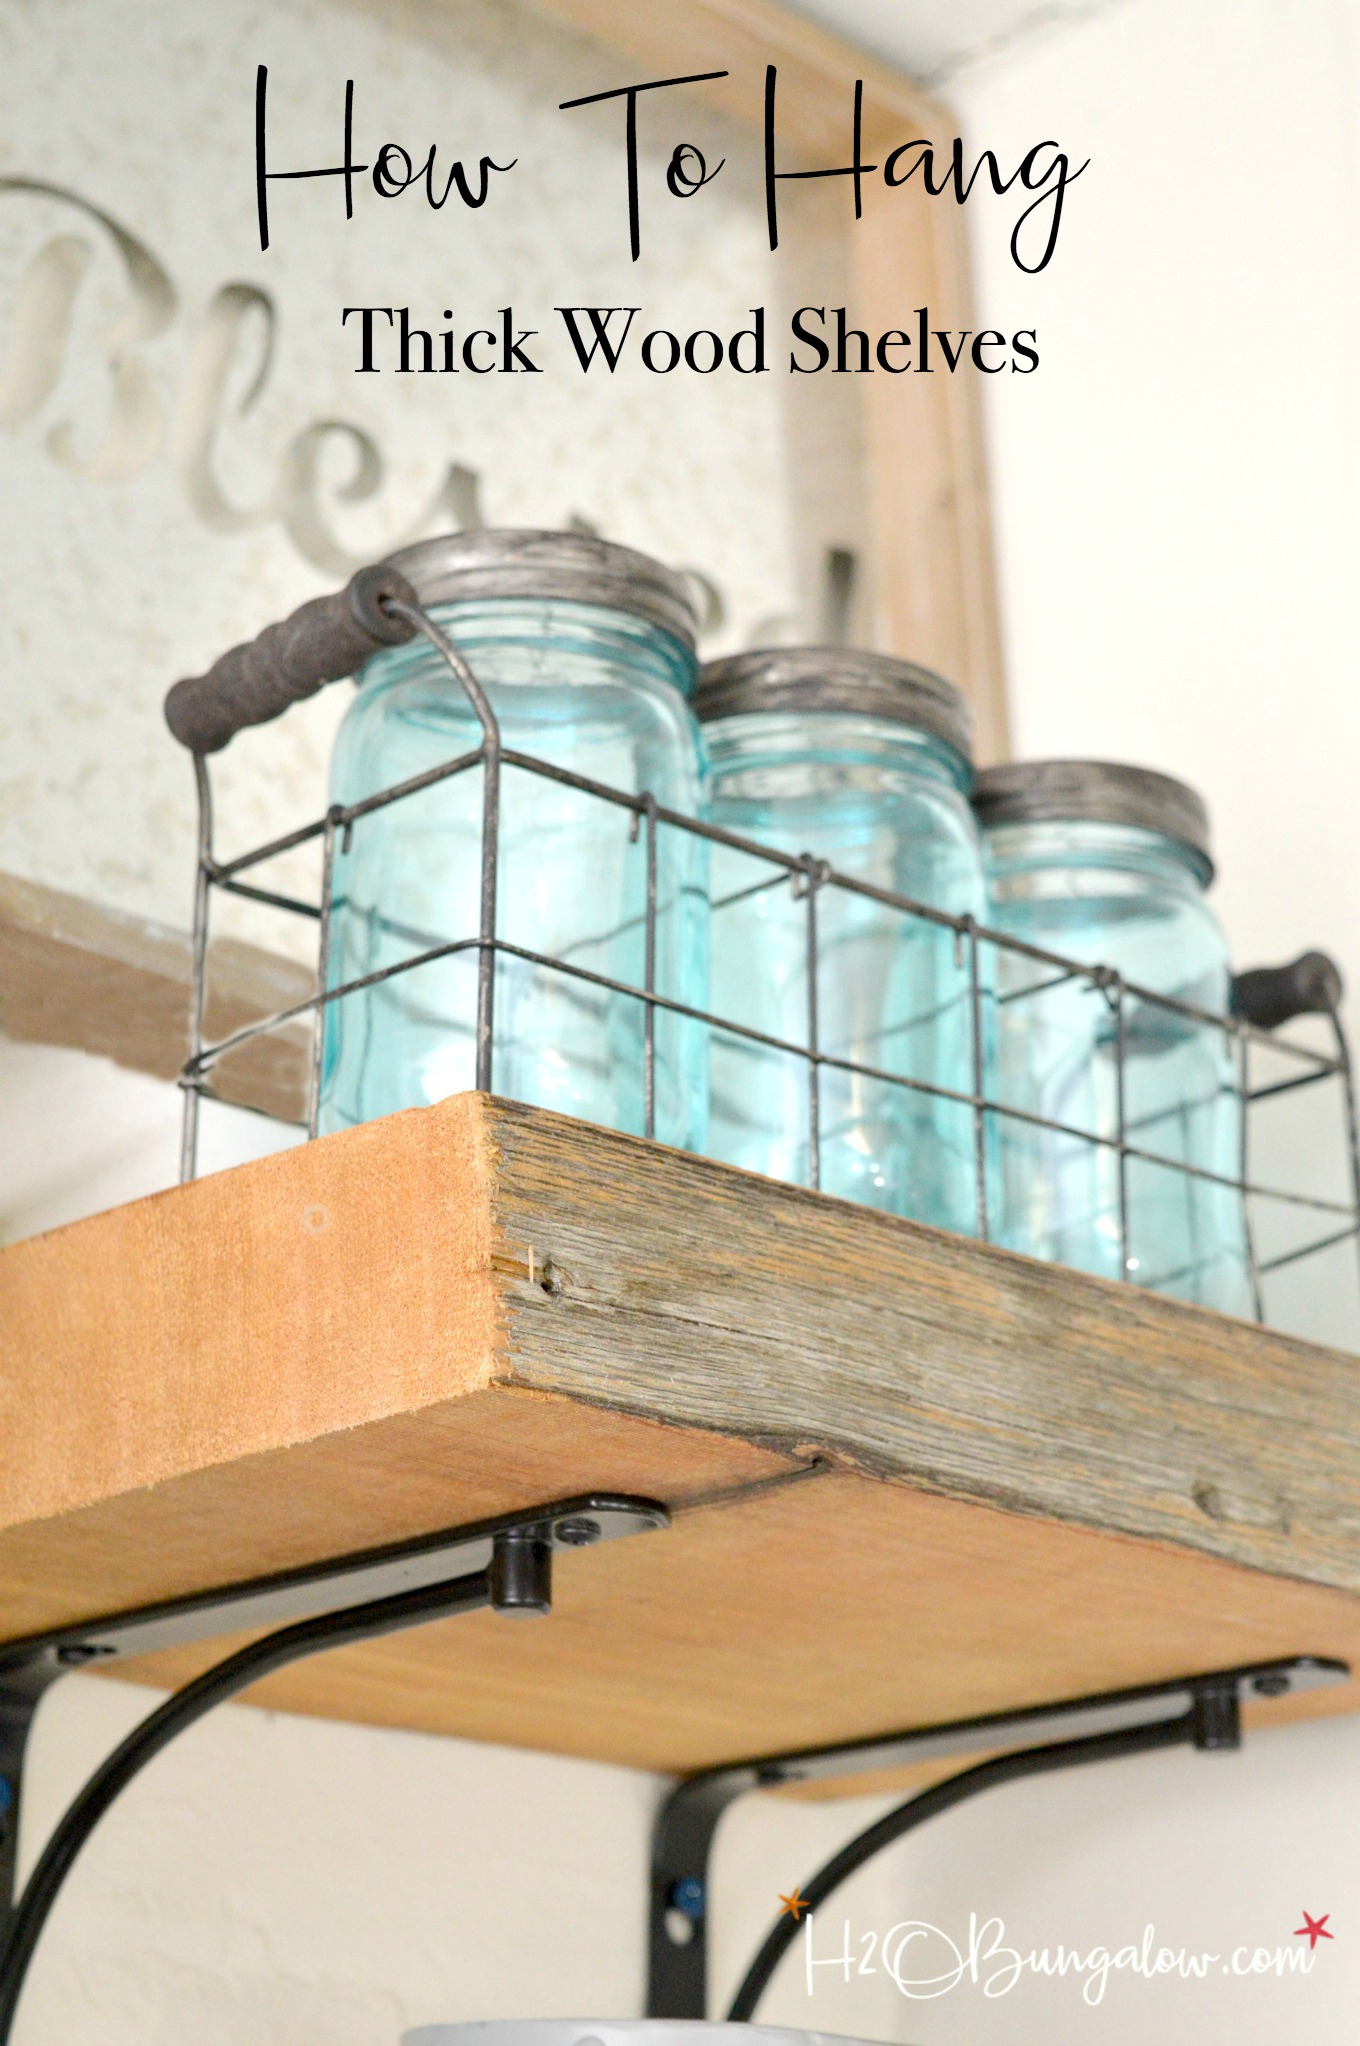 Best tips for installing thick wood shelfs or live edge wood shelves on a wall. Plus a list of resources to find great wood with character. Easy DIY tips on tools, bolts and more. I've installed three of these in my home and now have the system down to a simple few step process! Find lots of home improvement and home decor projects on H2OBungalow.com 